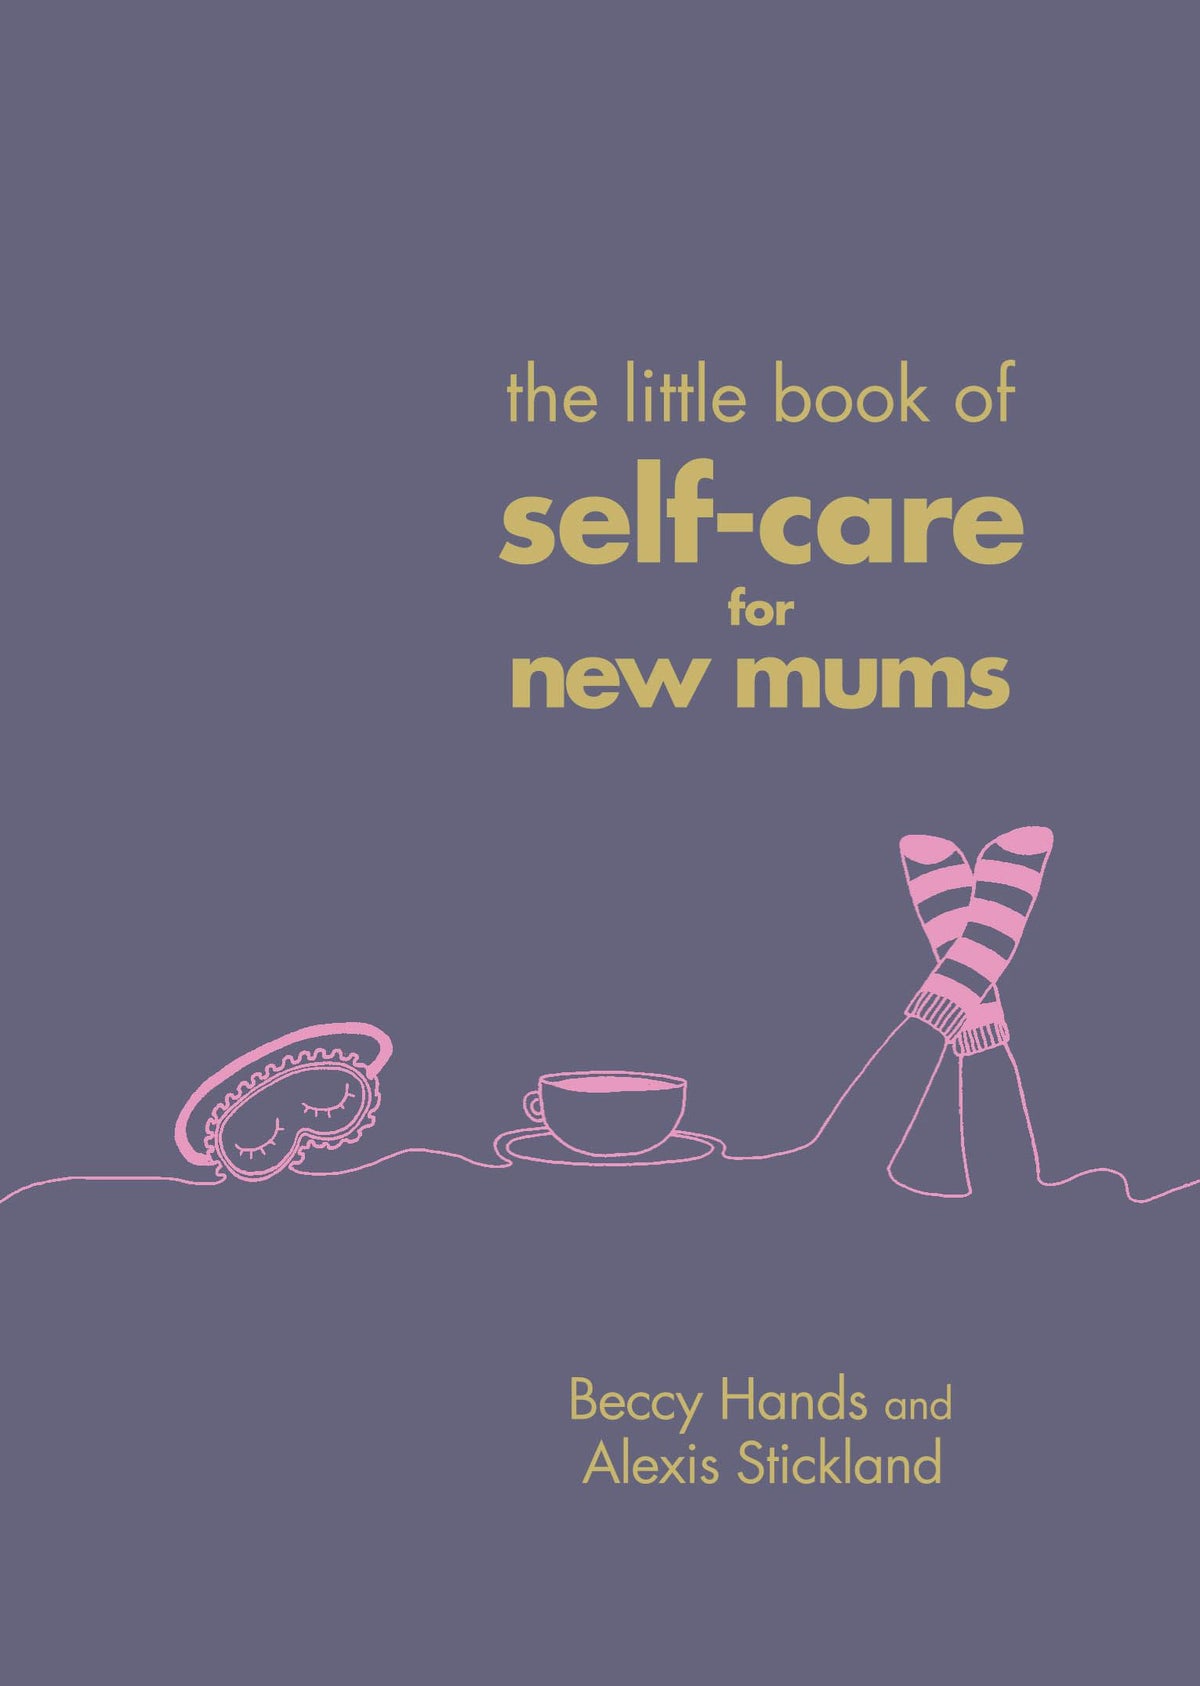 Book - Little Book of Self-Care for New Mums